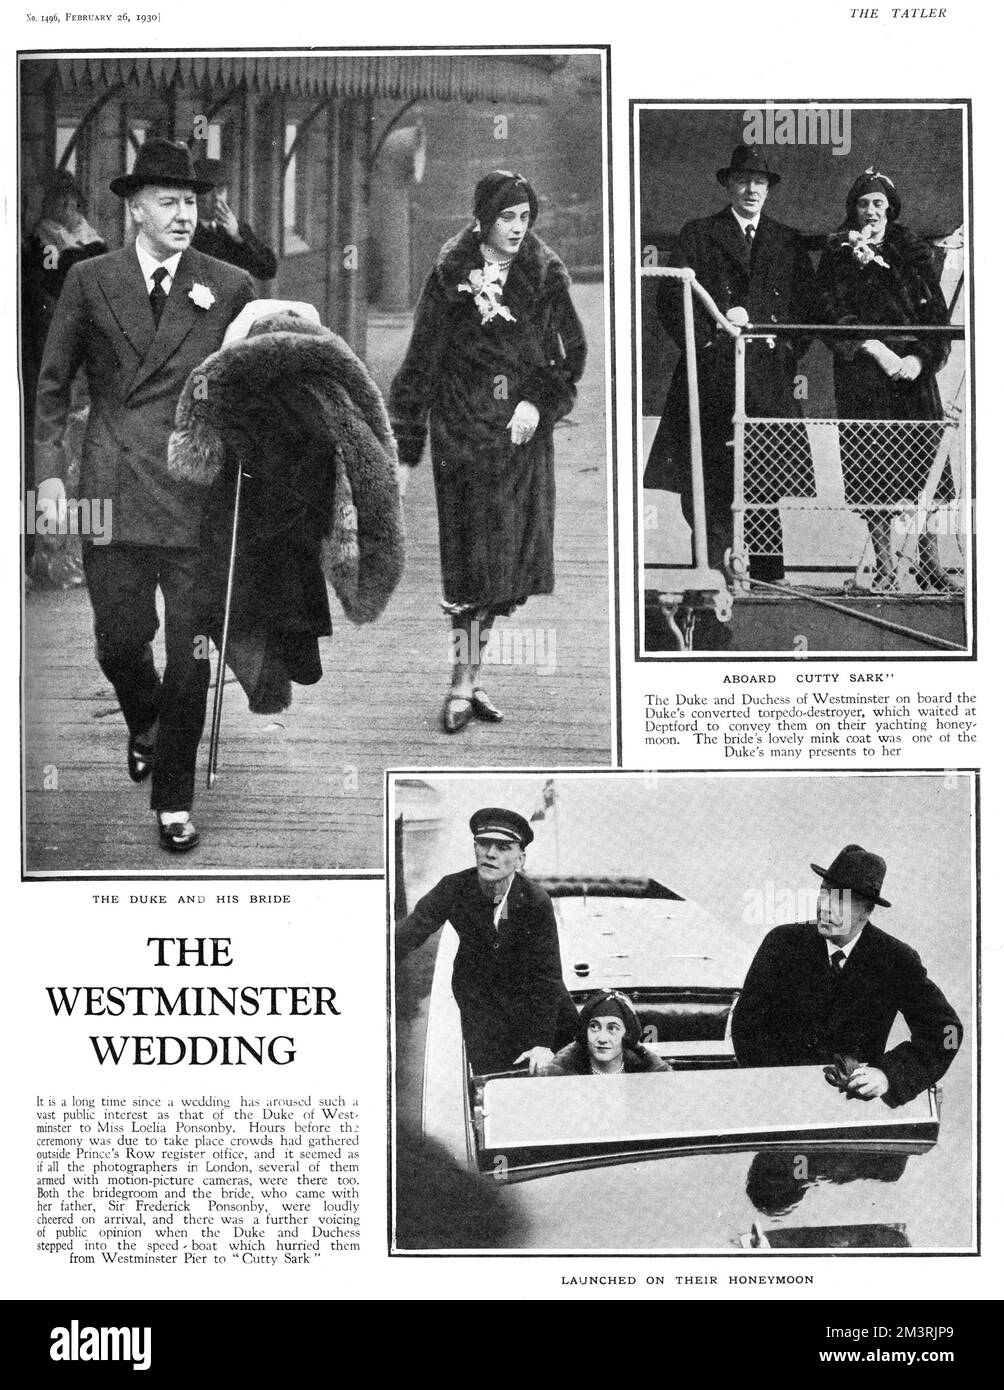 Page from The Tatler reporting on the society wedding of Hugh Grosvenor, 2nd Duke of Westminster and Loelia Ponsonby (his third wife) at Prince's Row registry office on 20 February 1930.  Pictures show the Duke and his new bride leaving from Westminster Pier on a speedboat.  From there they boarded the Duke's converted torpedoe destroyer, the Cutty Sark which waited at Deptford to convey them on their yachting honeymoon.  The fur coat worn by Loelia was one of the Duke's many wedding presents to her.  The couple, who never had children, divorced in 1947 after years of separation.    1930 Stock Photo